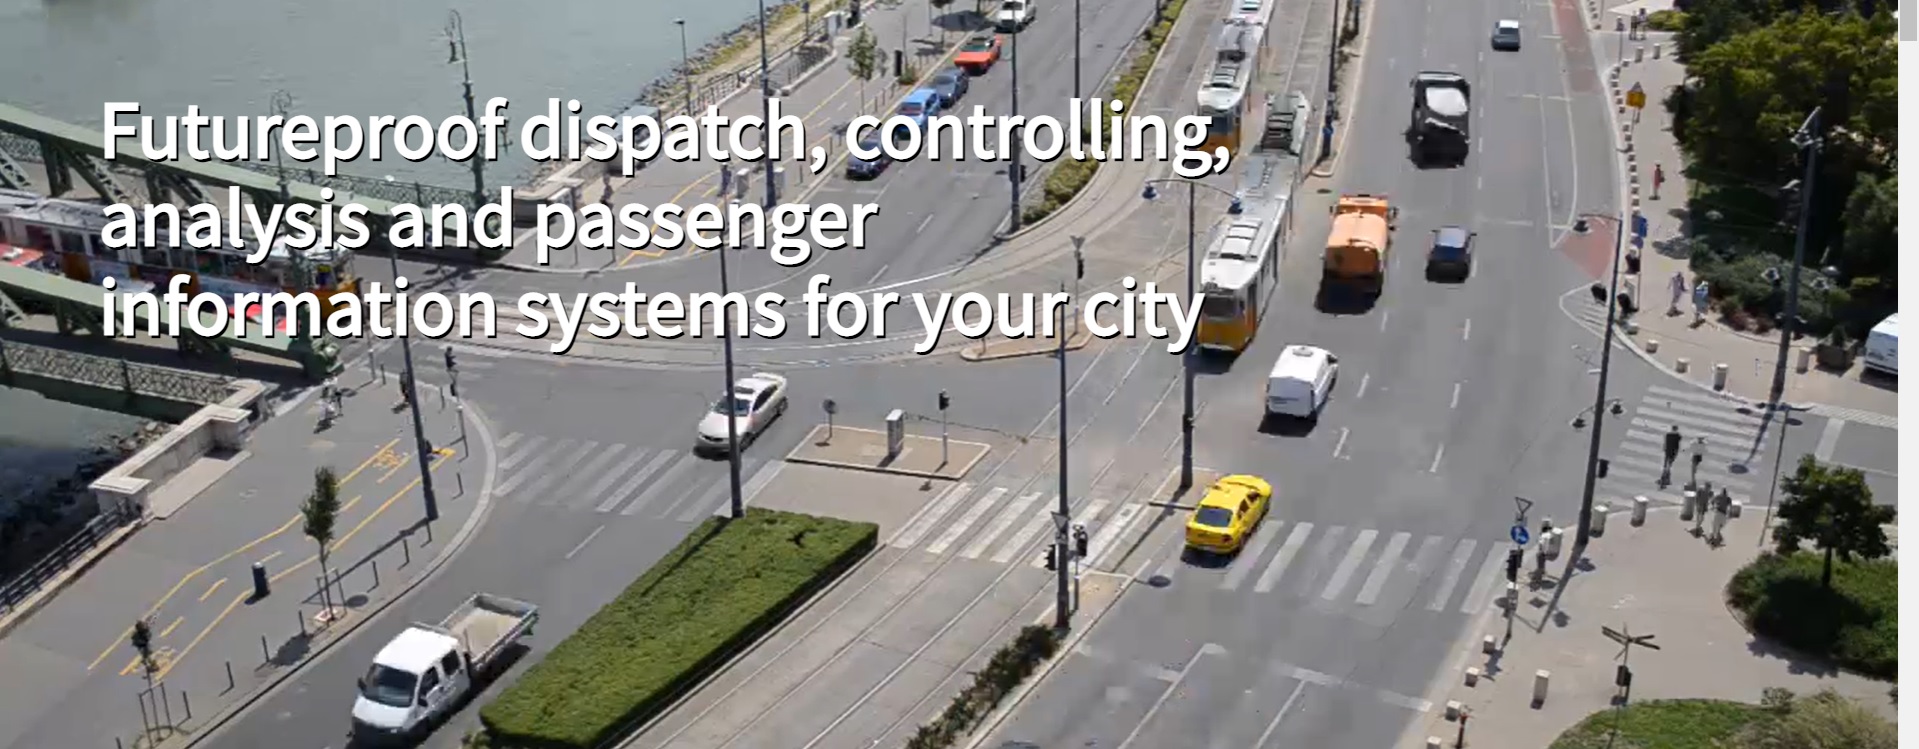 Traffic controlling, analyzing and passenger info system